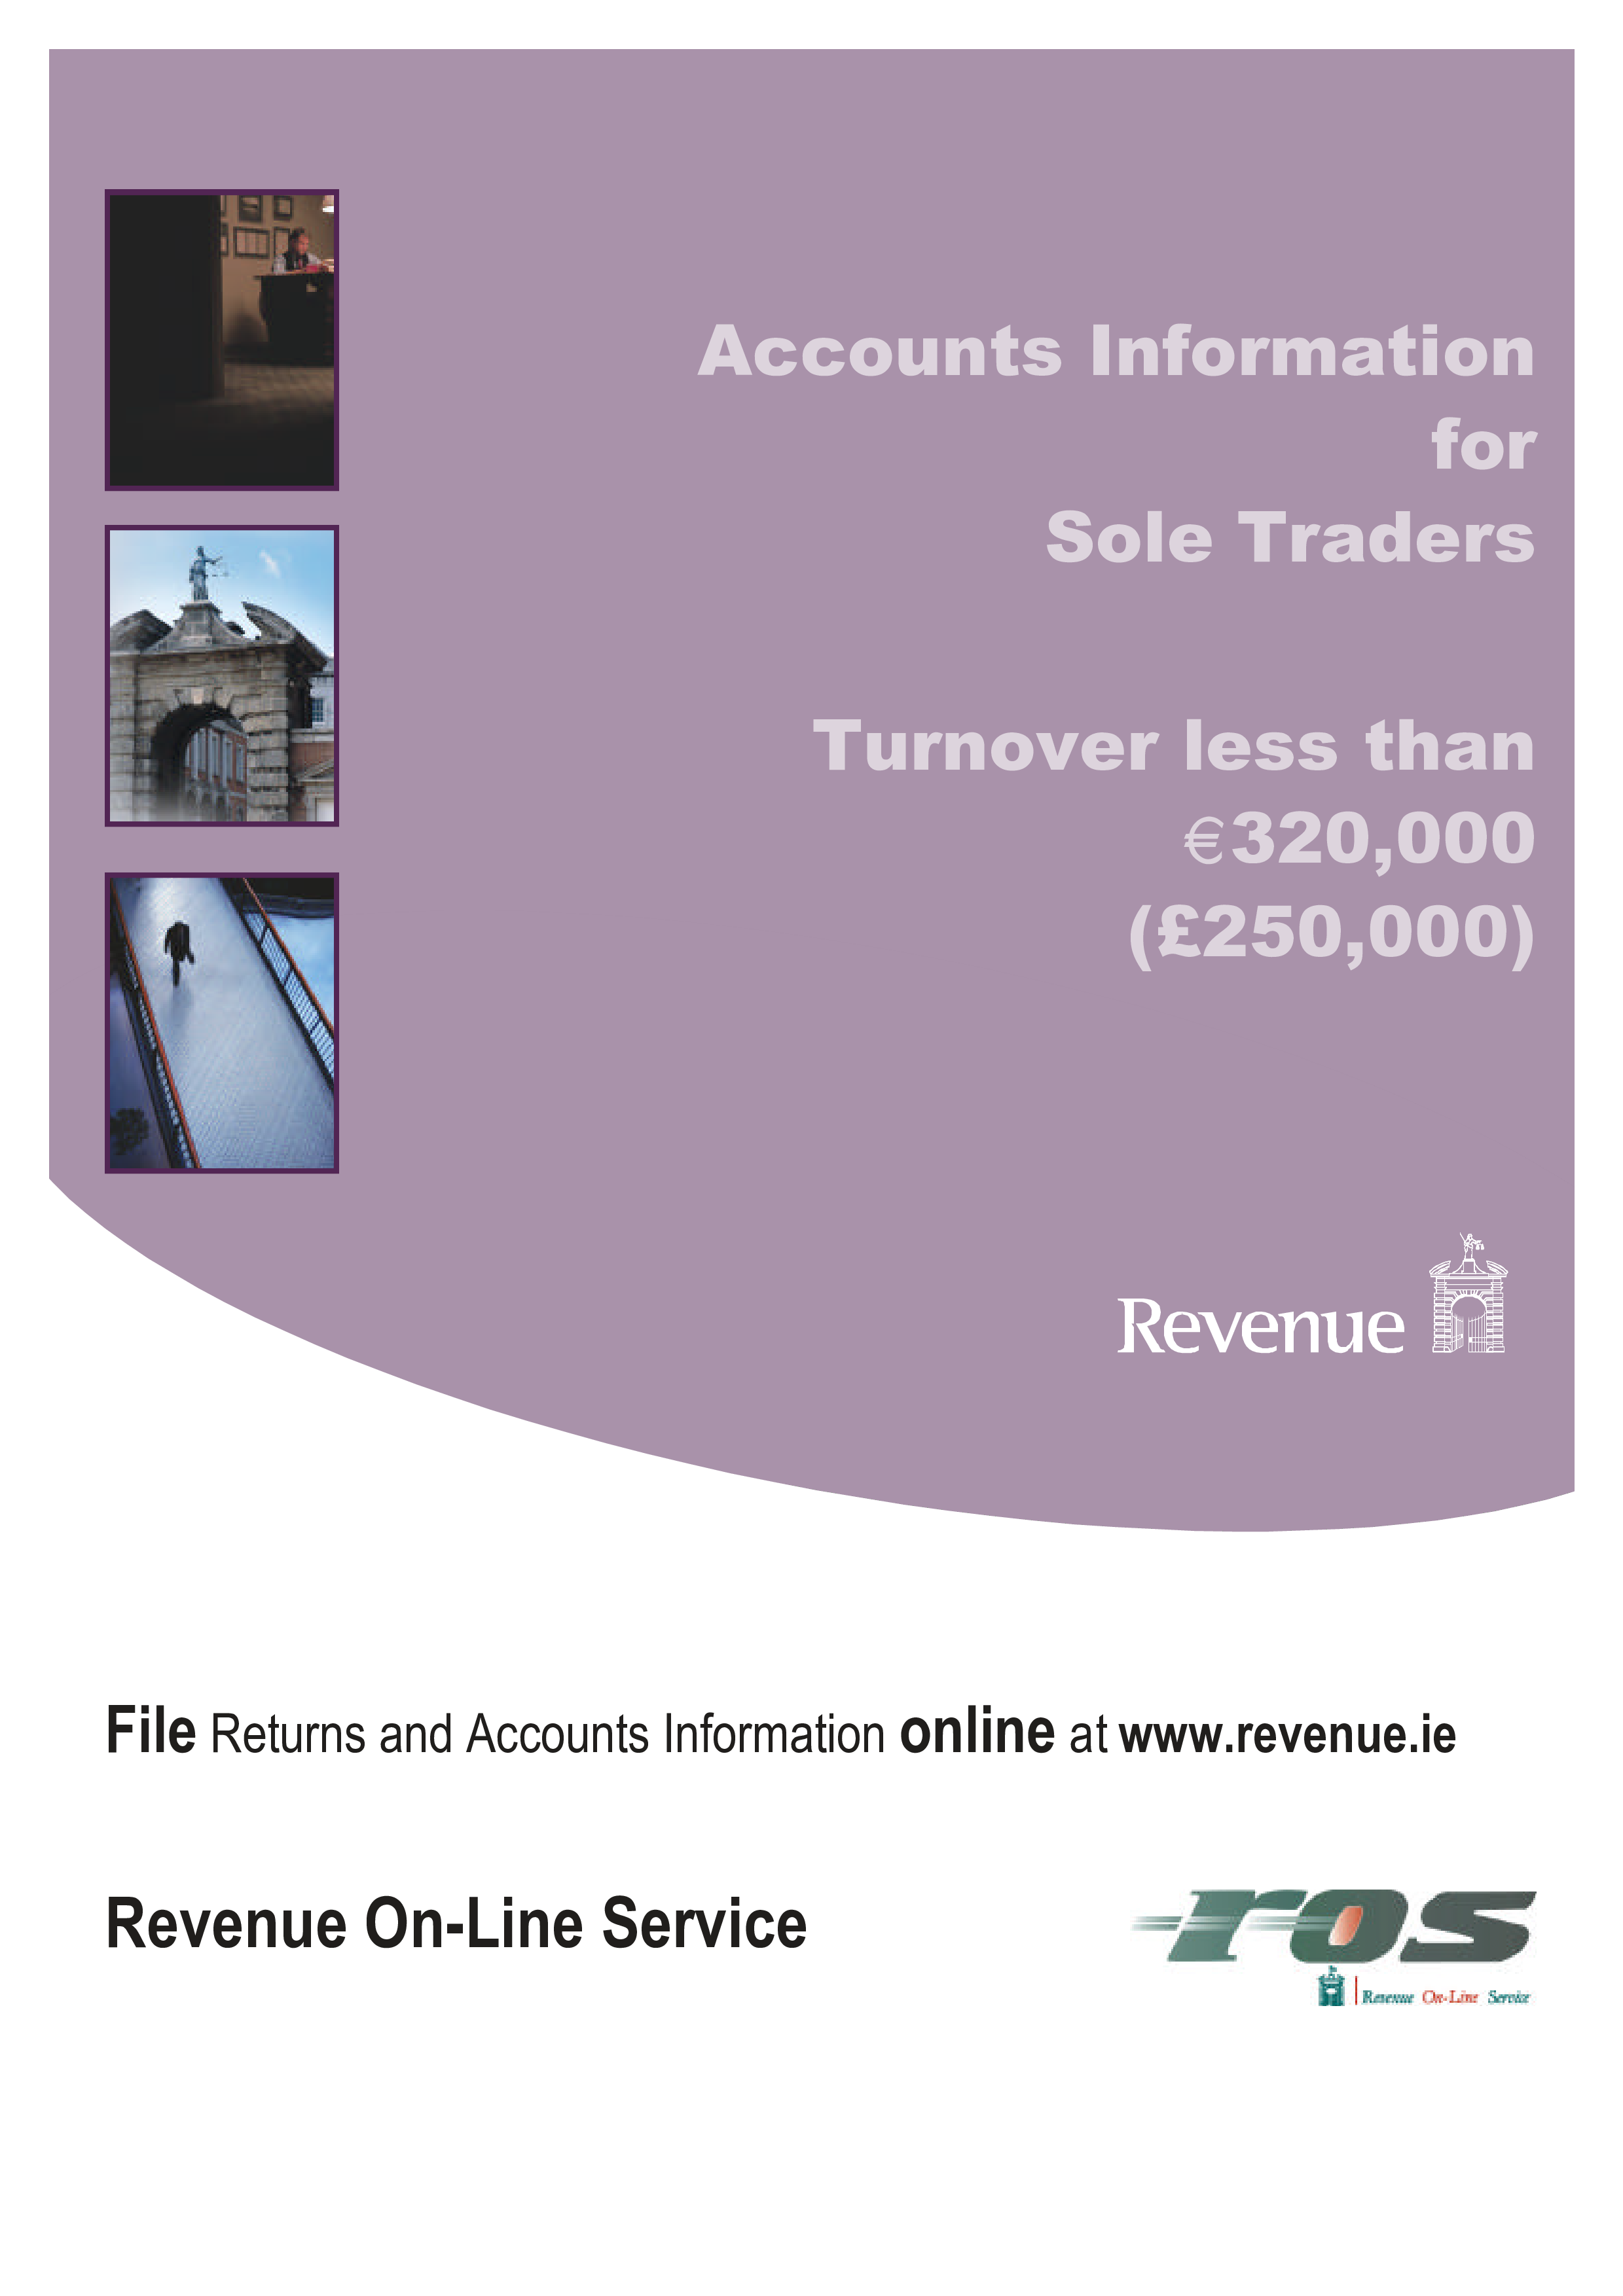 stam 1 - accounts information for sole traders turnover less than £320,000 (£250,000) plantilla imagen principal